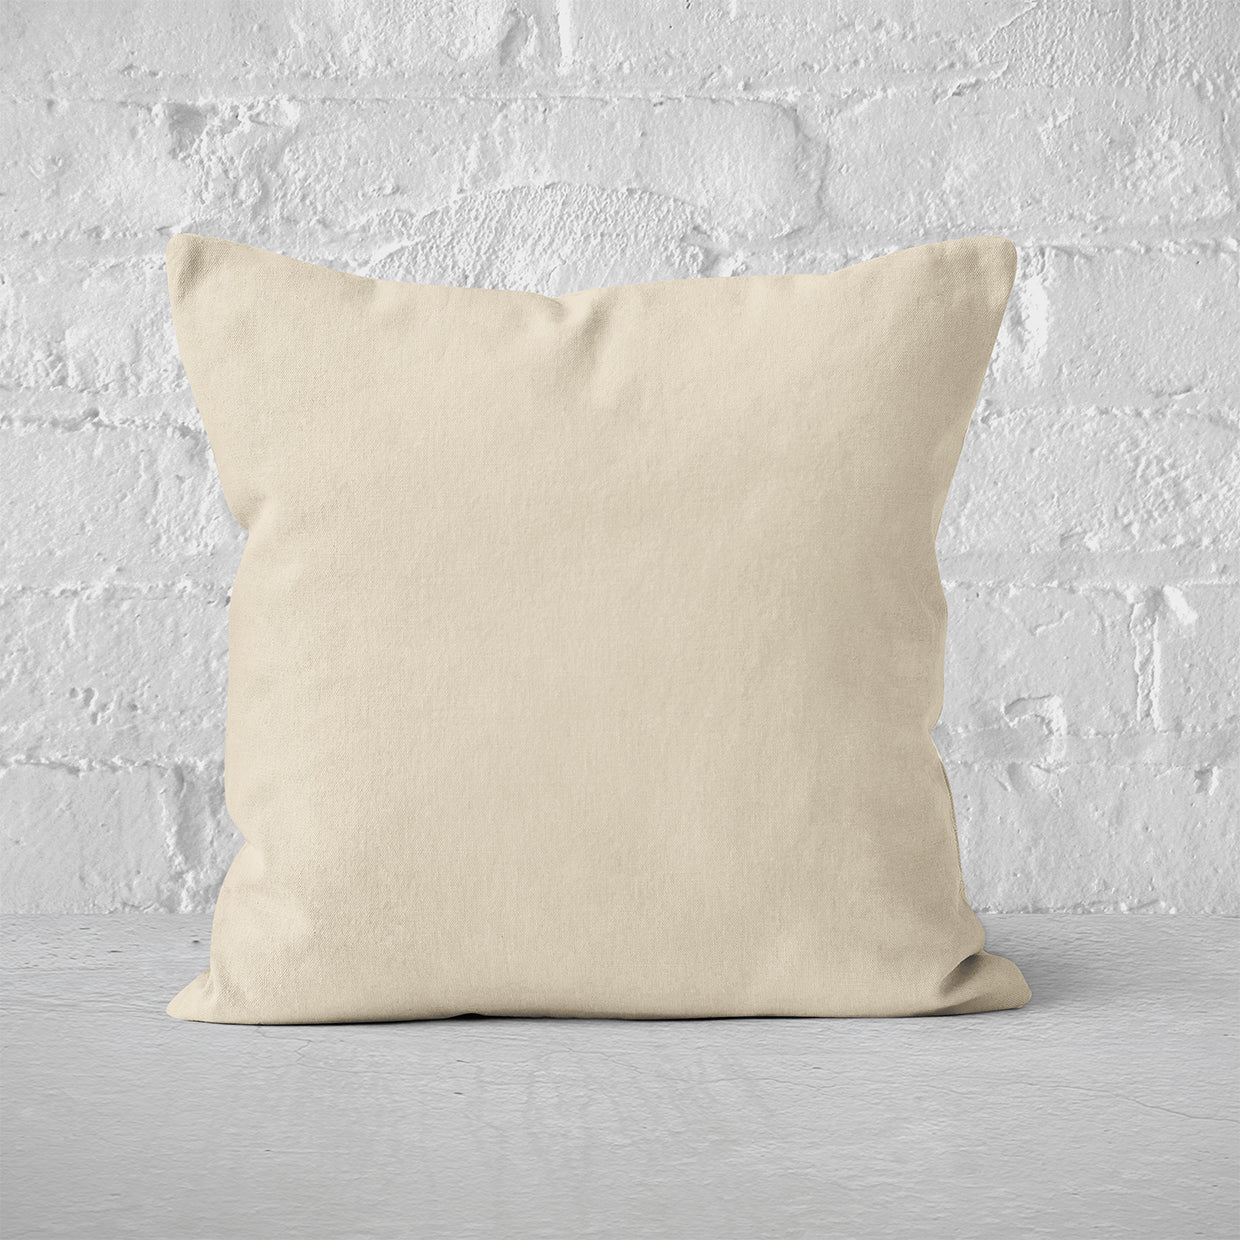 Pillow Cover Art Feature 'Solid' - Beige - Cotton Twill